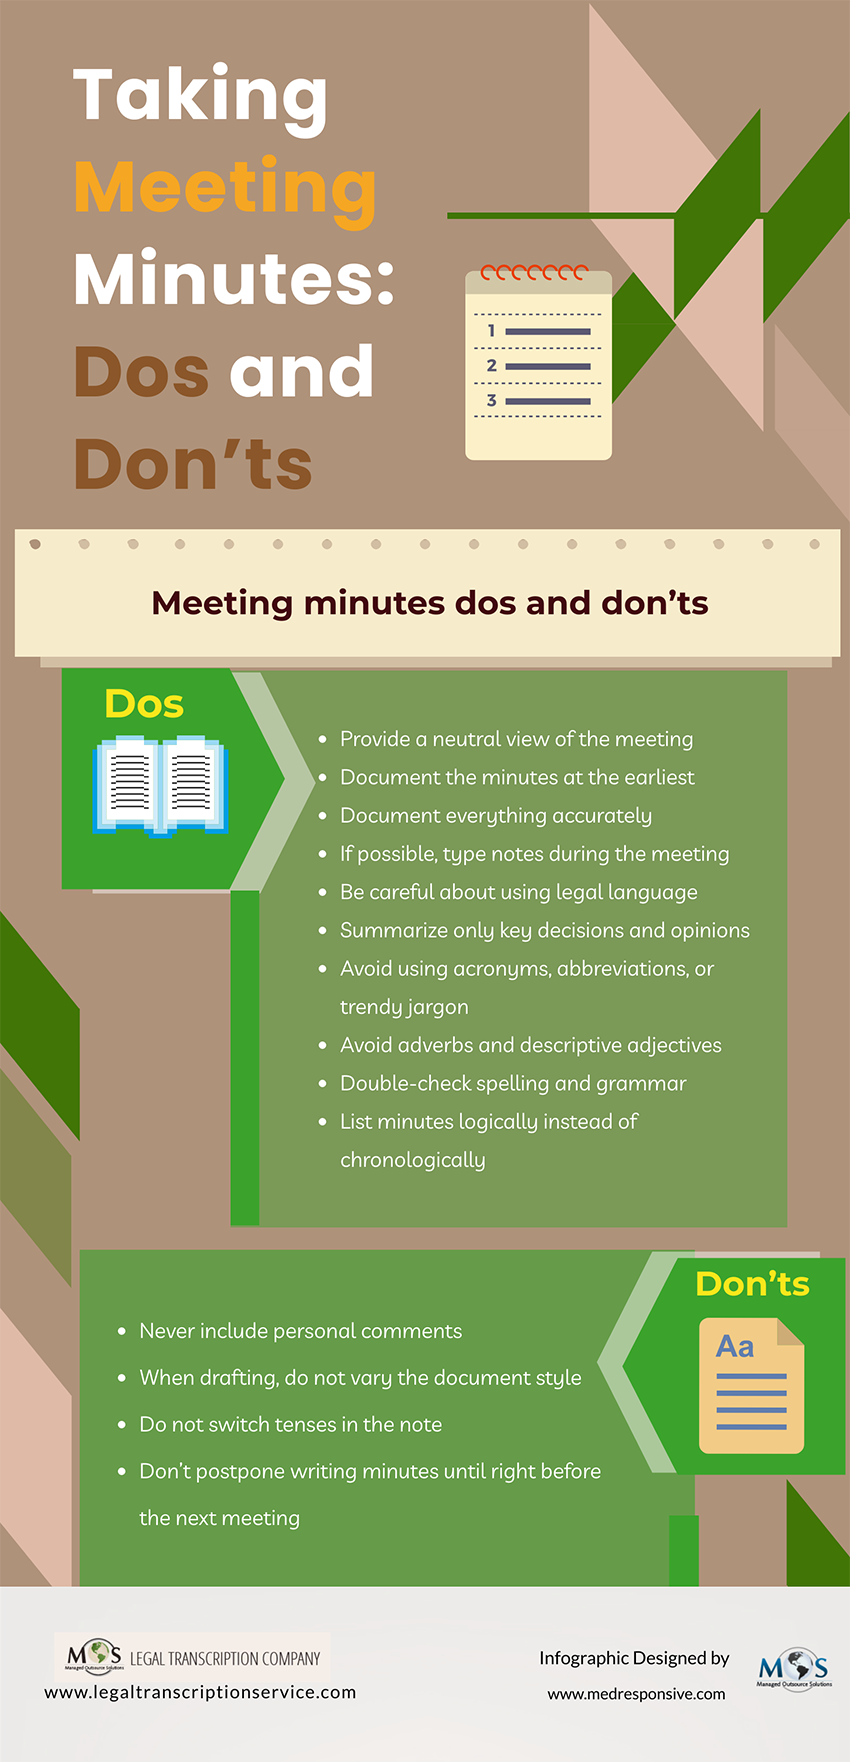 Taking Meeting Minutes Dos and Donts